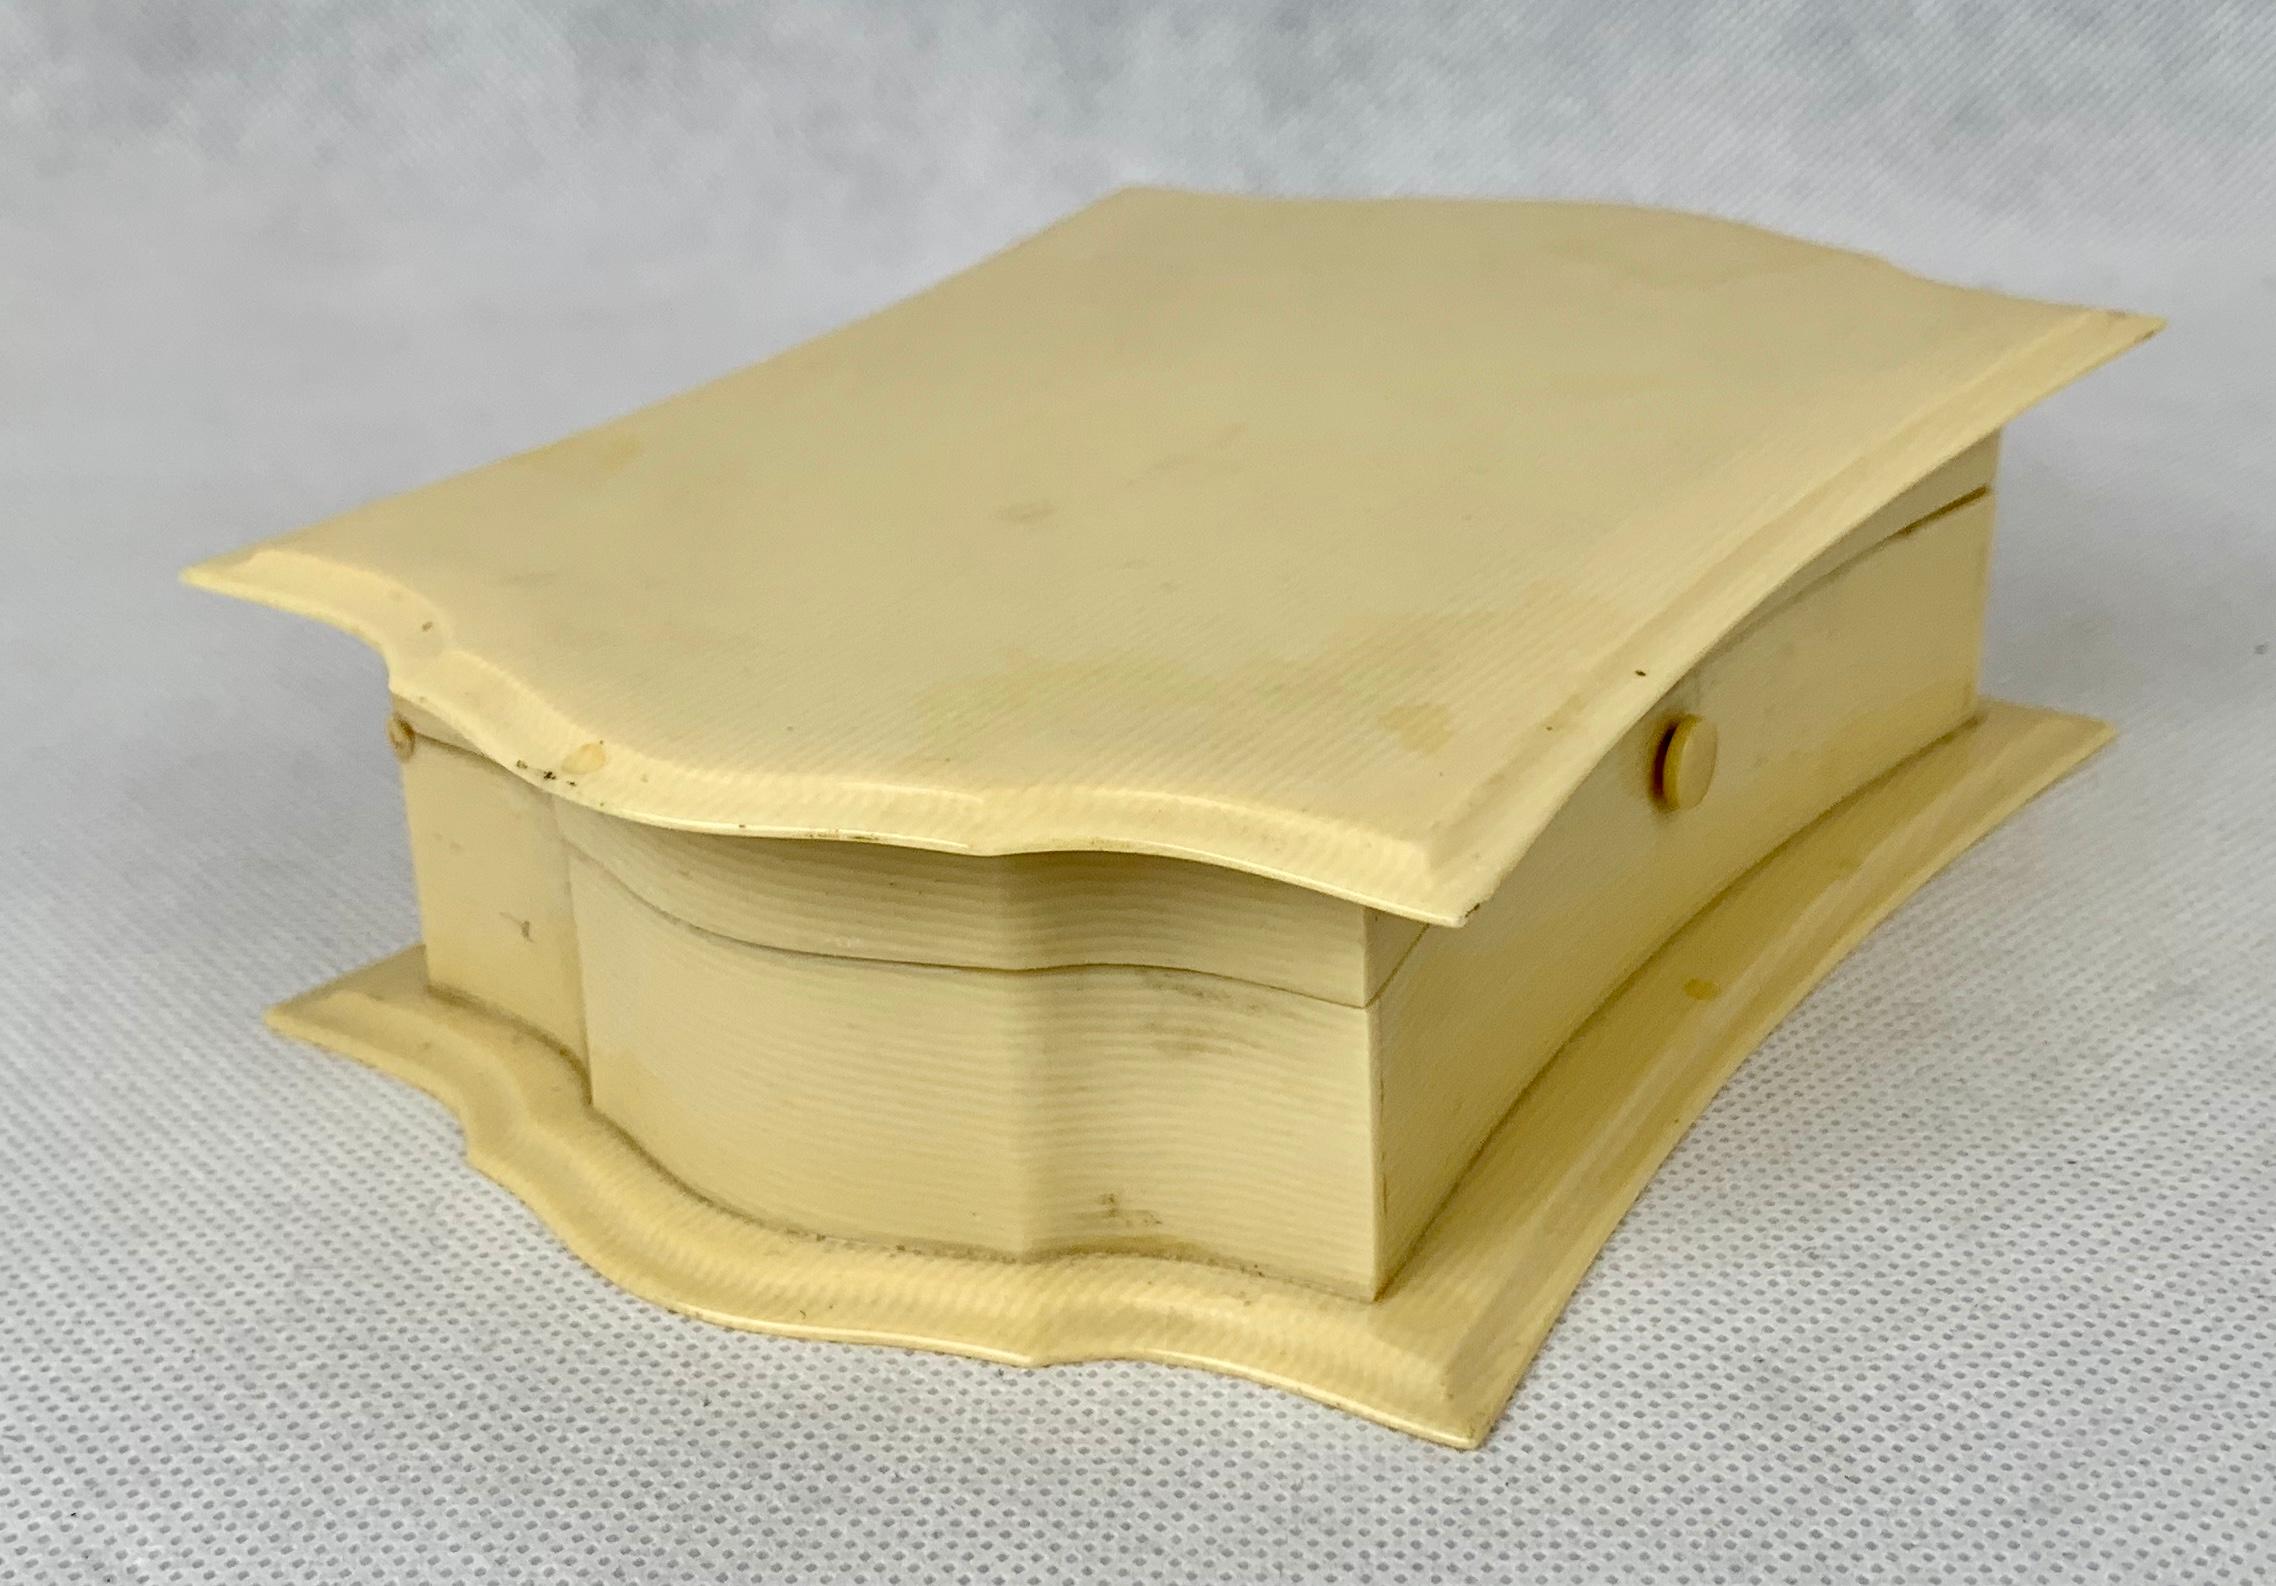 DuBarry Ivorine Celluloid Jewelry Box with a Turtle Shaped Top In Good Condition For Sale In West Palm Beach, FL